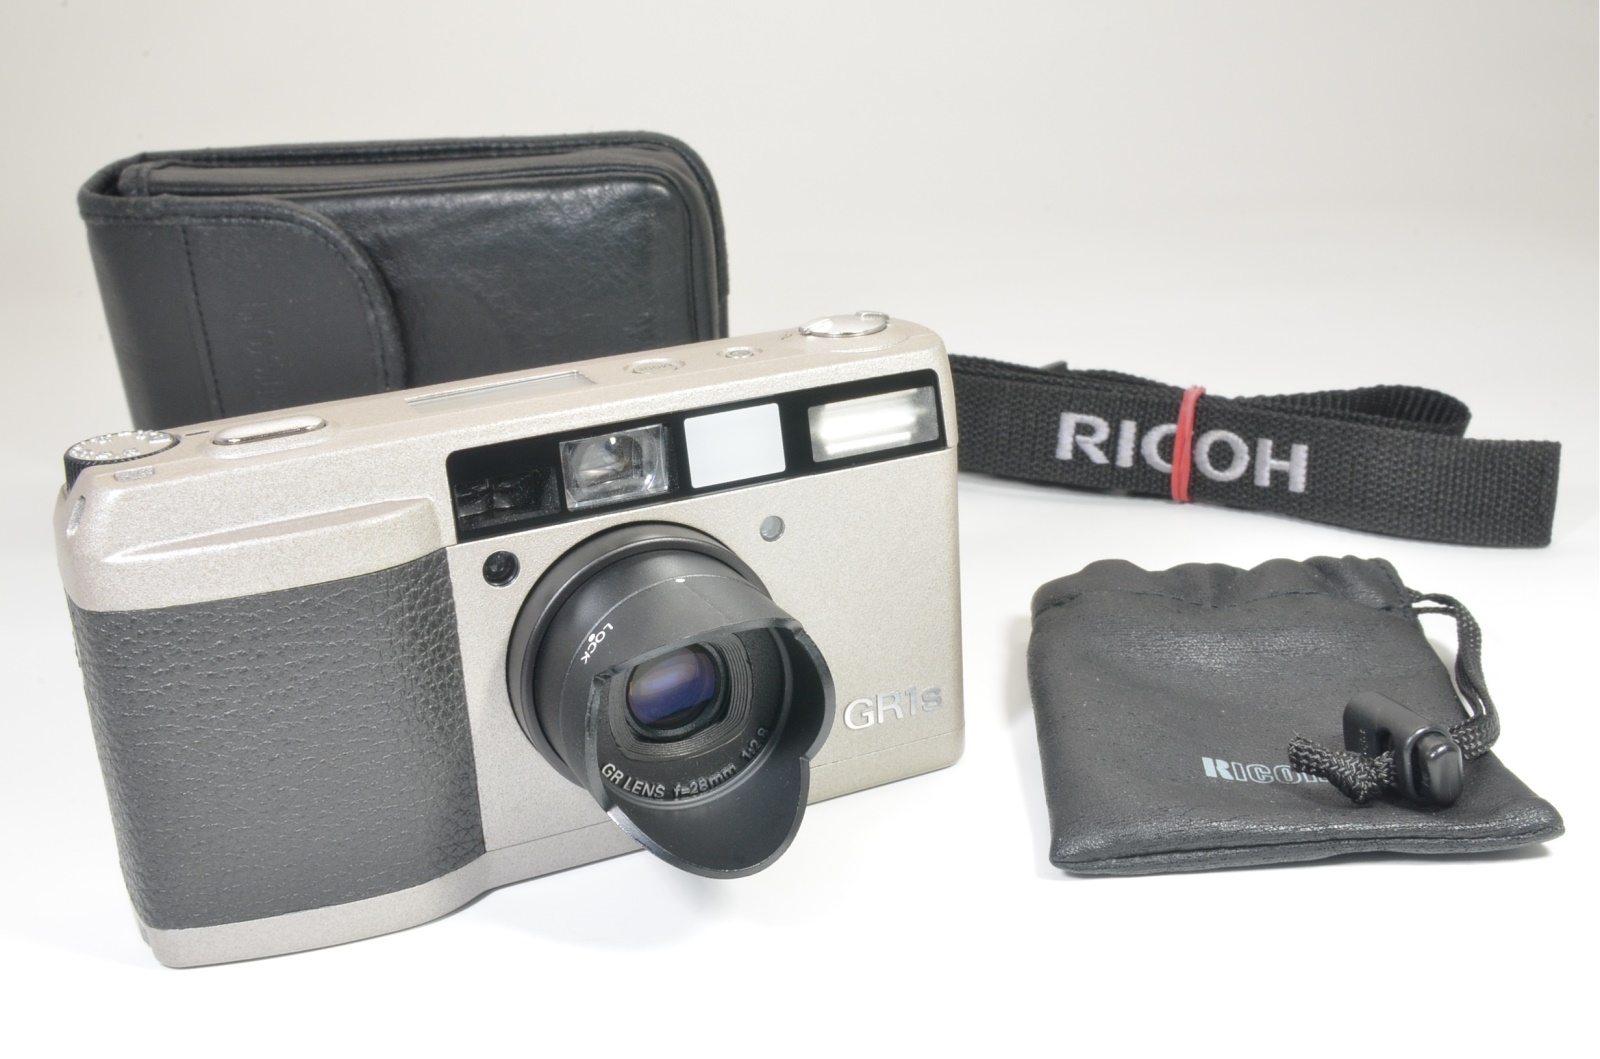 RICOH GR1s Date Silver 28mm f2.8 P&S film camera from Japan 